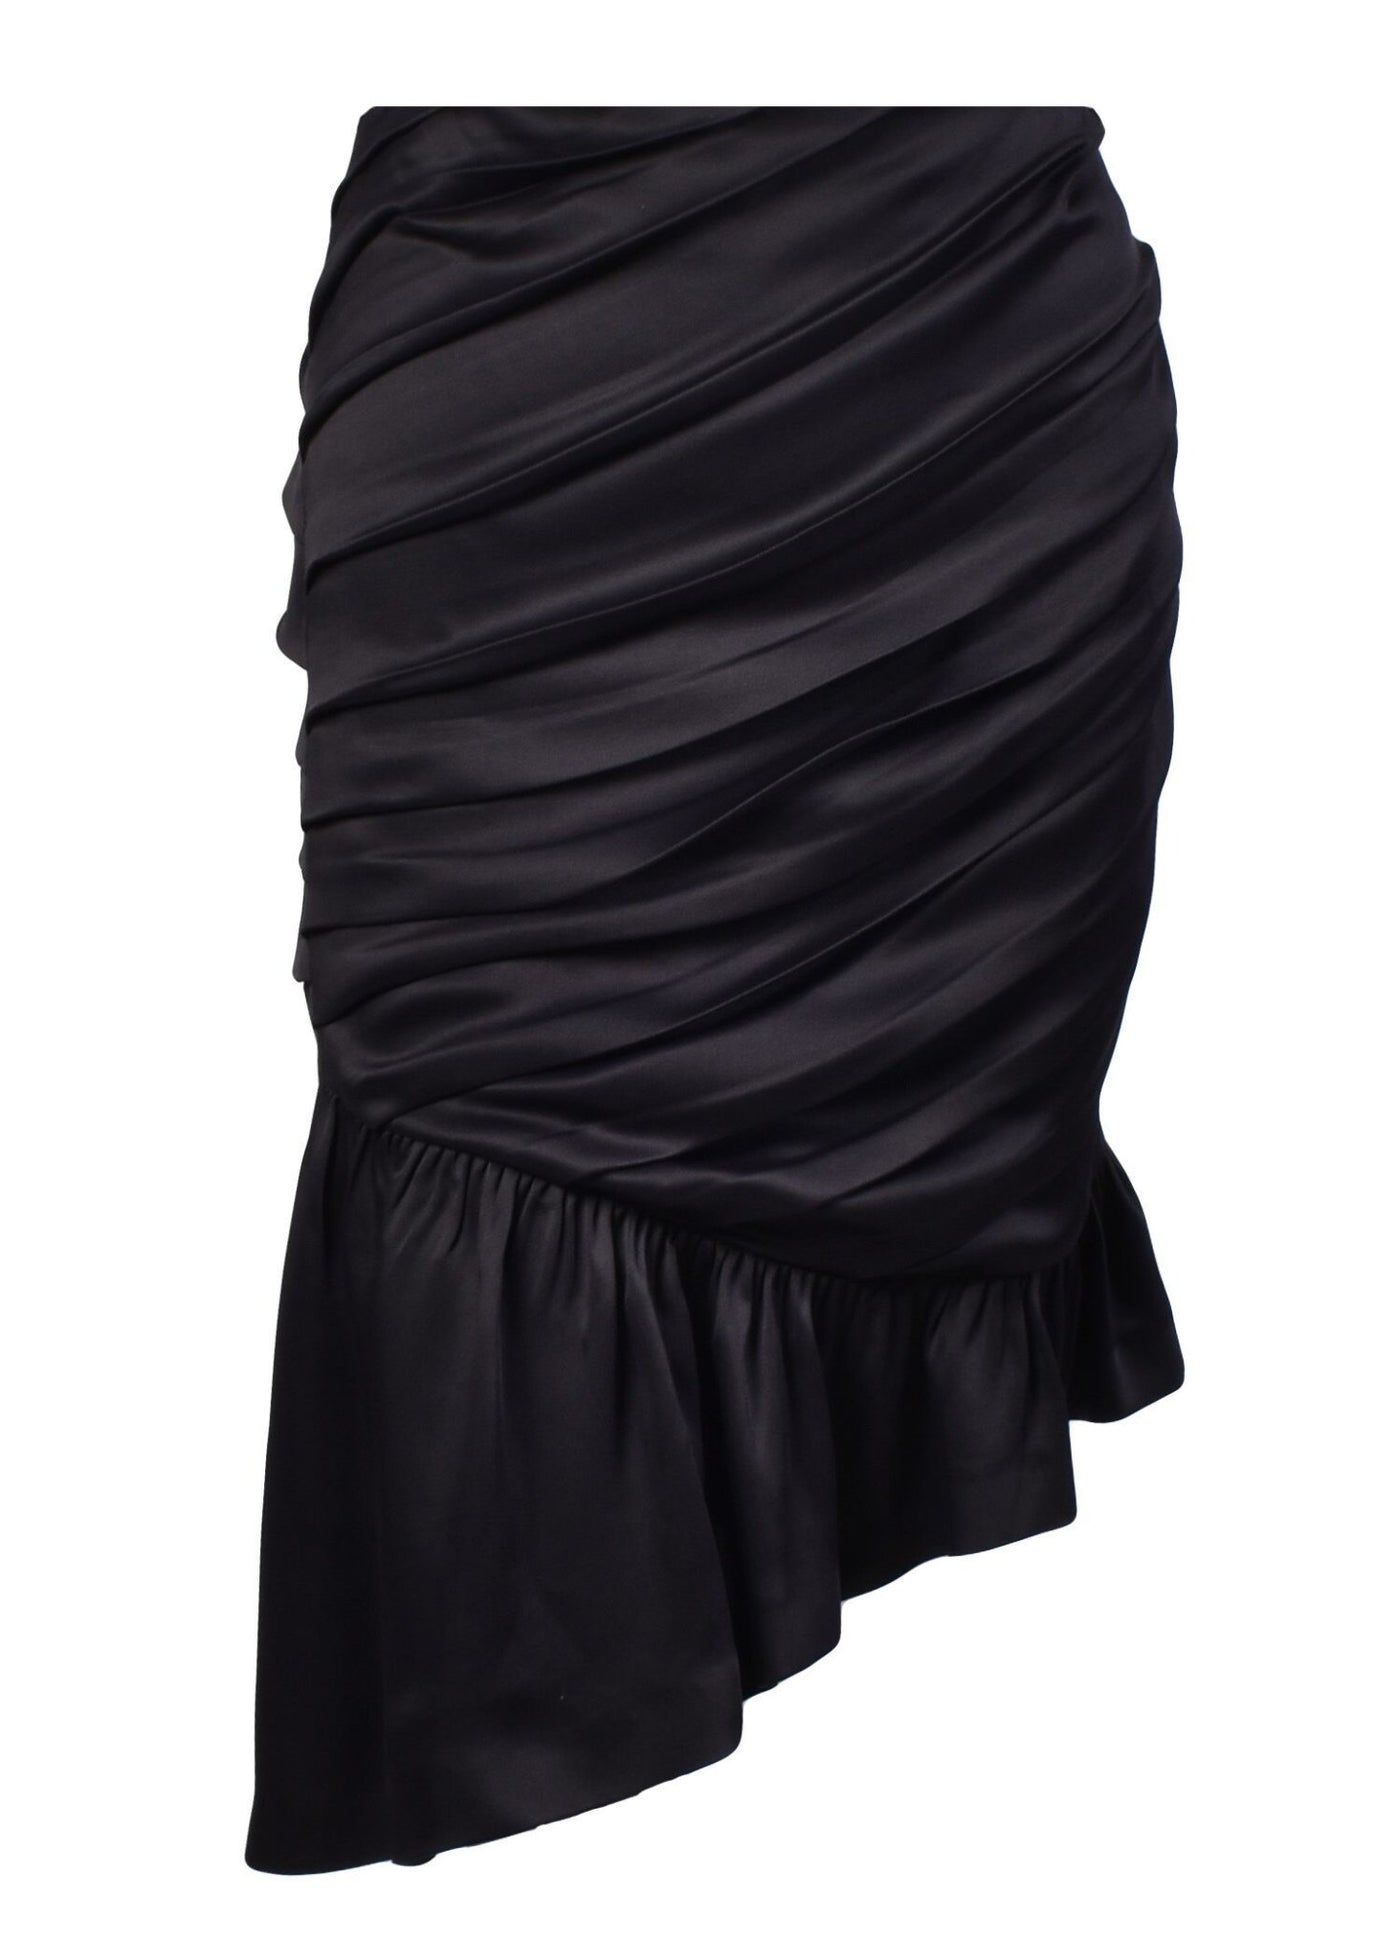 Draped Skirt - The Clothing LoungeNOPIN